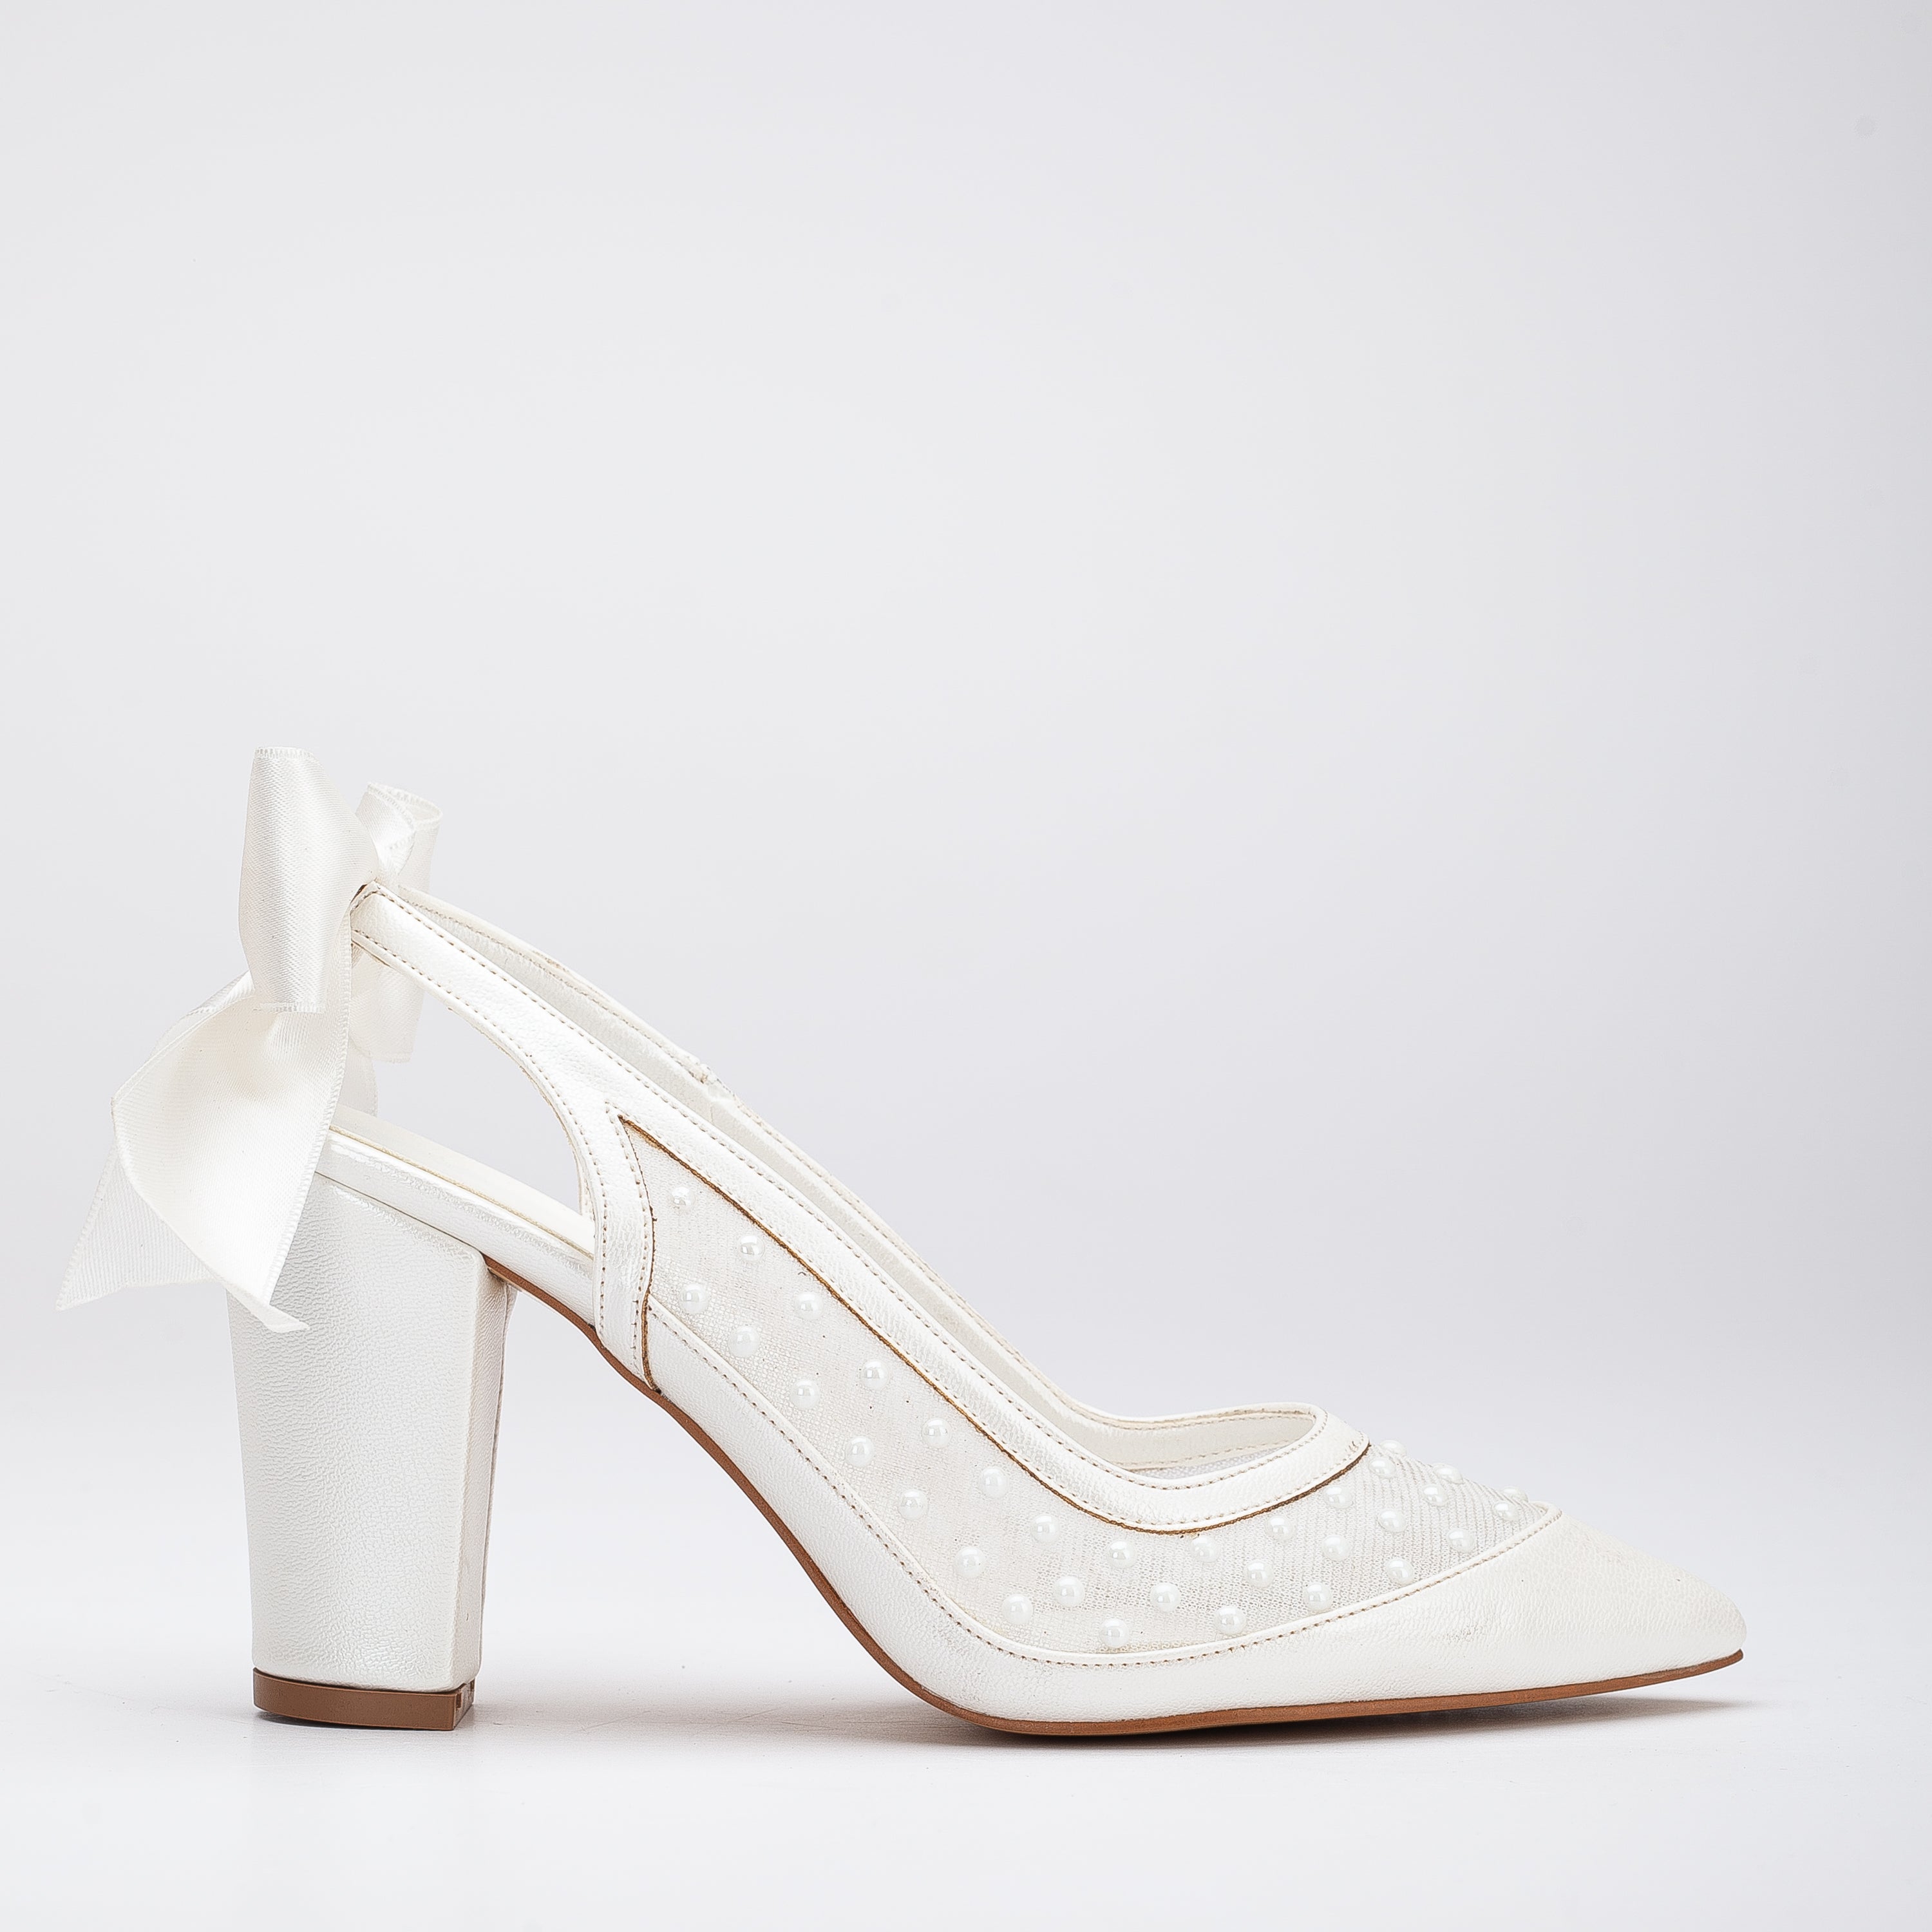 A pair of white high heel shoes on a bed photo – Free Fashion Image on  Unsplash